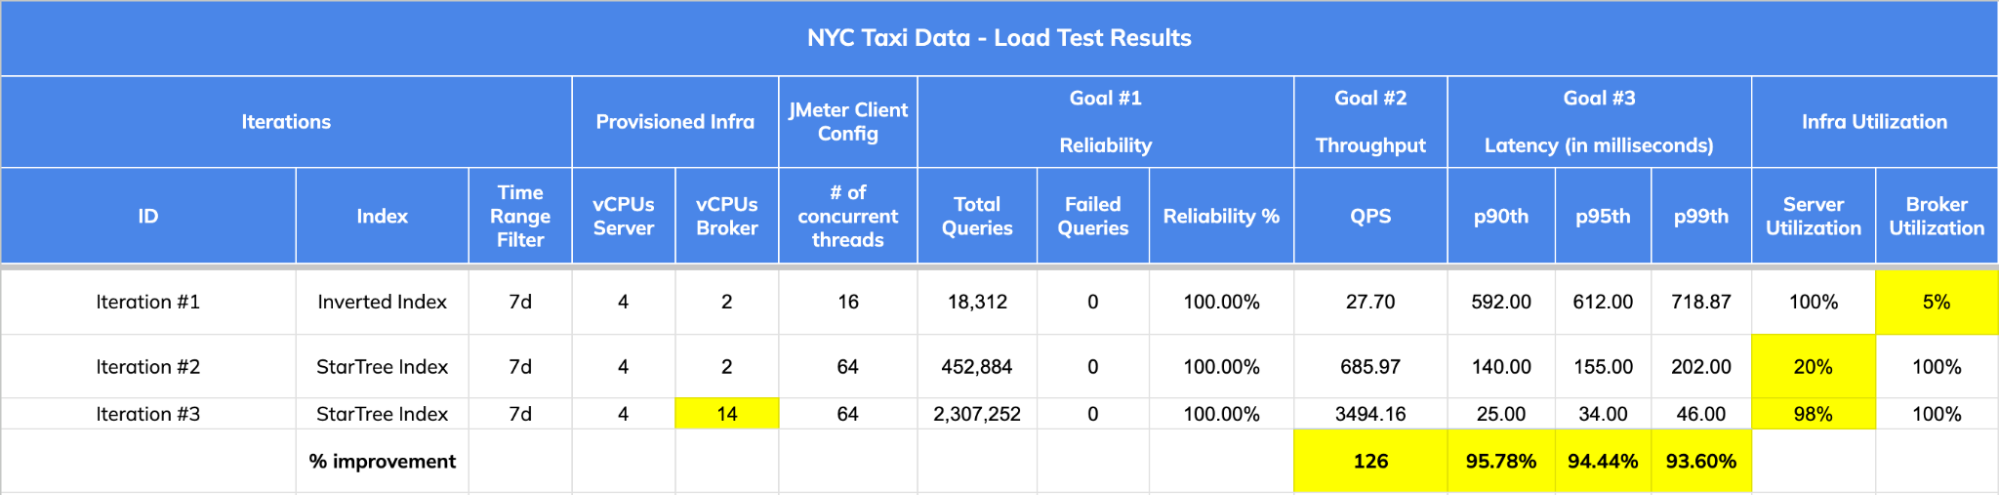 NYC Taxi data load test results chart